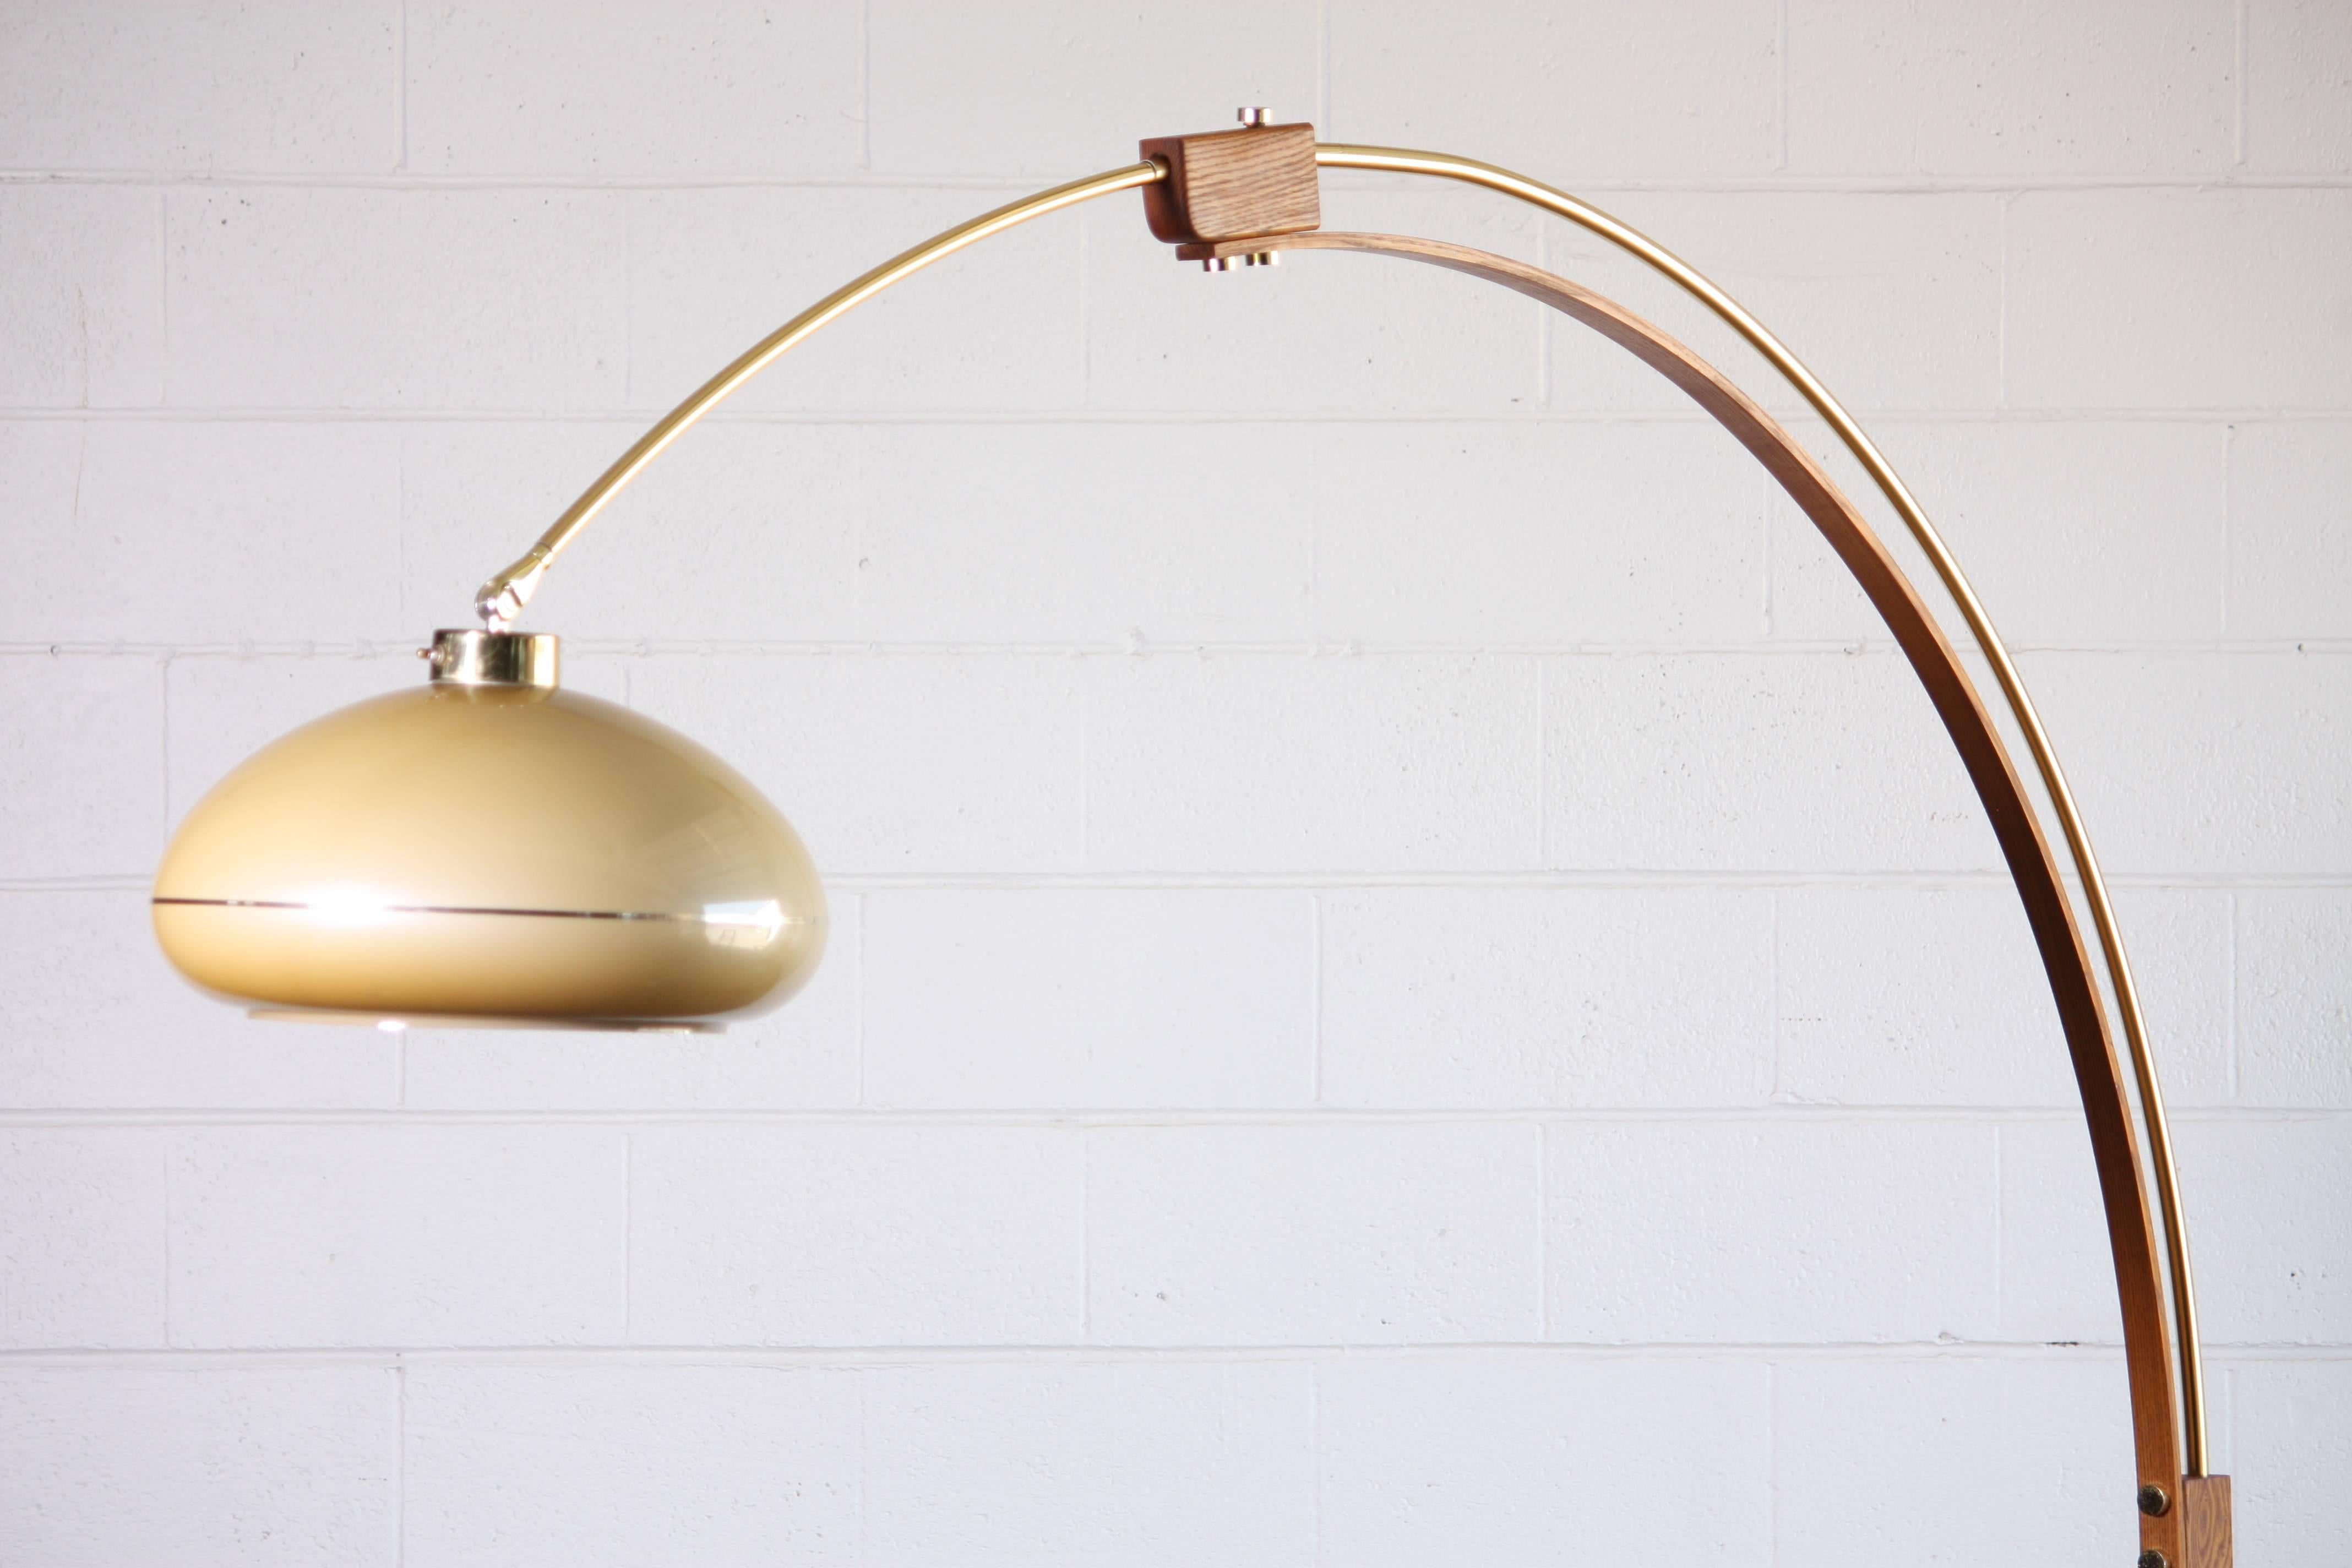 Amazing arc floor lamp constructed of brass tubing and solid wood. The shade is a wonderful creamy opaque plastic. This lamp has centre height of just over 7ft. Making it a perfect fit to reach over a sofa and into the middle of the party.